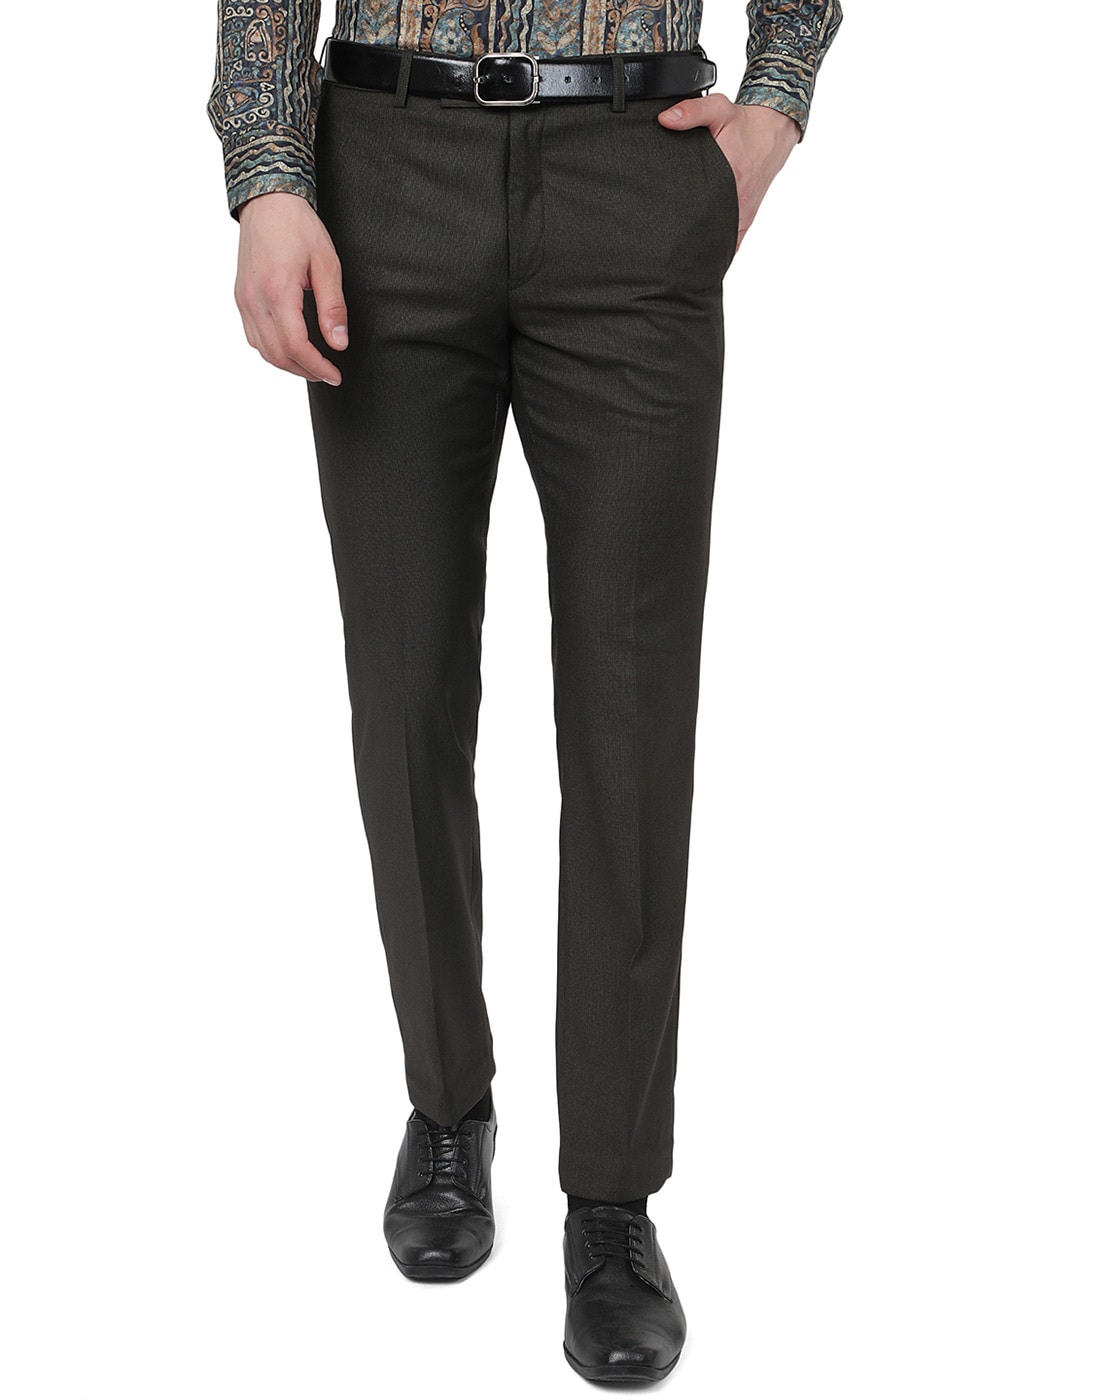 Buy Grey Trousers & Pants for Men by FIRST CLASS Online | Ajio.com